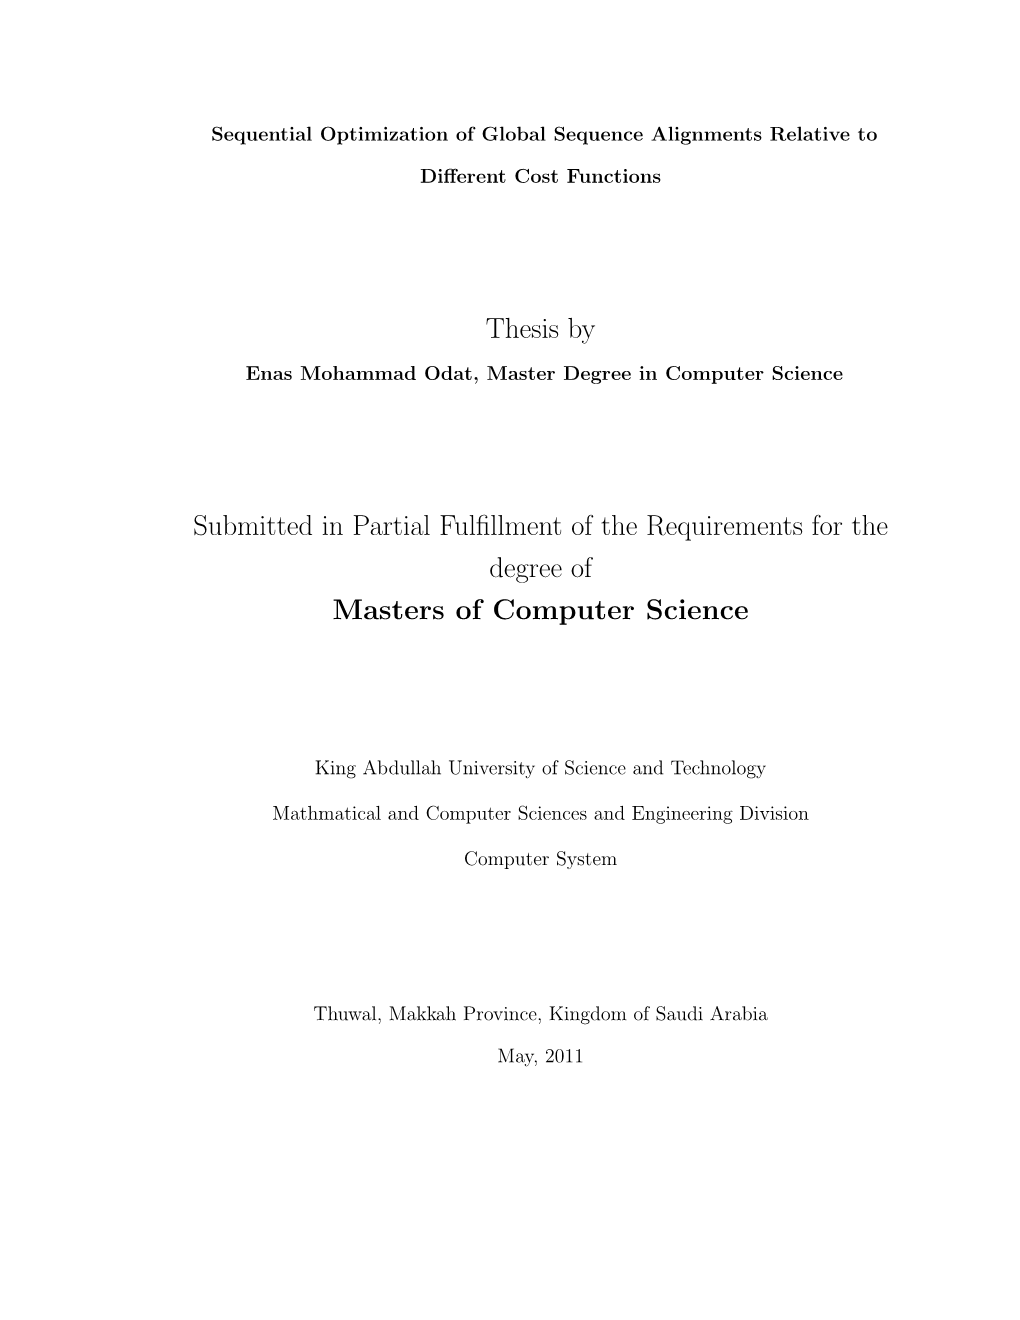 Thesis by Submitted in Partial Fulfillment of the Requirements For